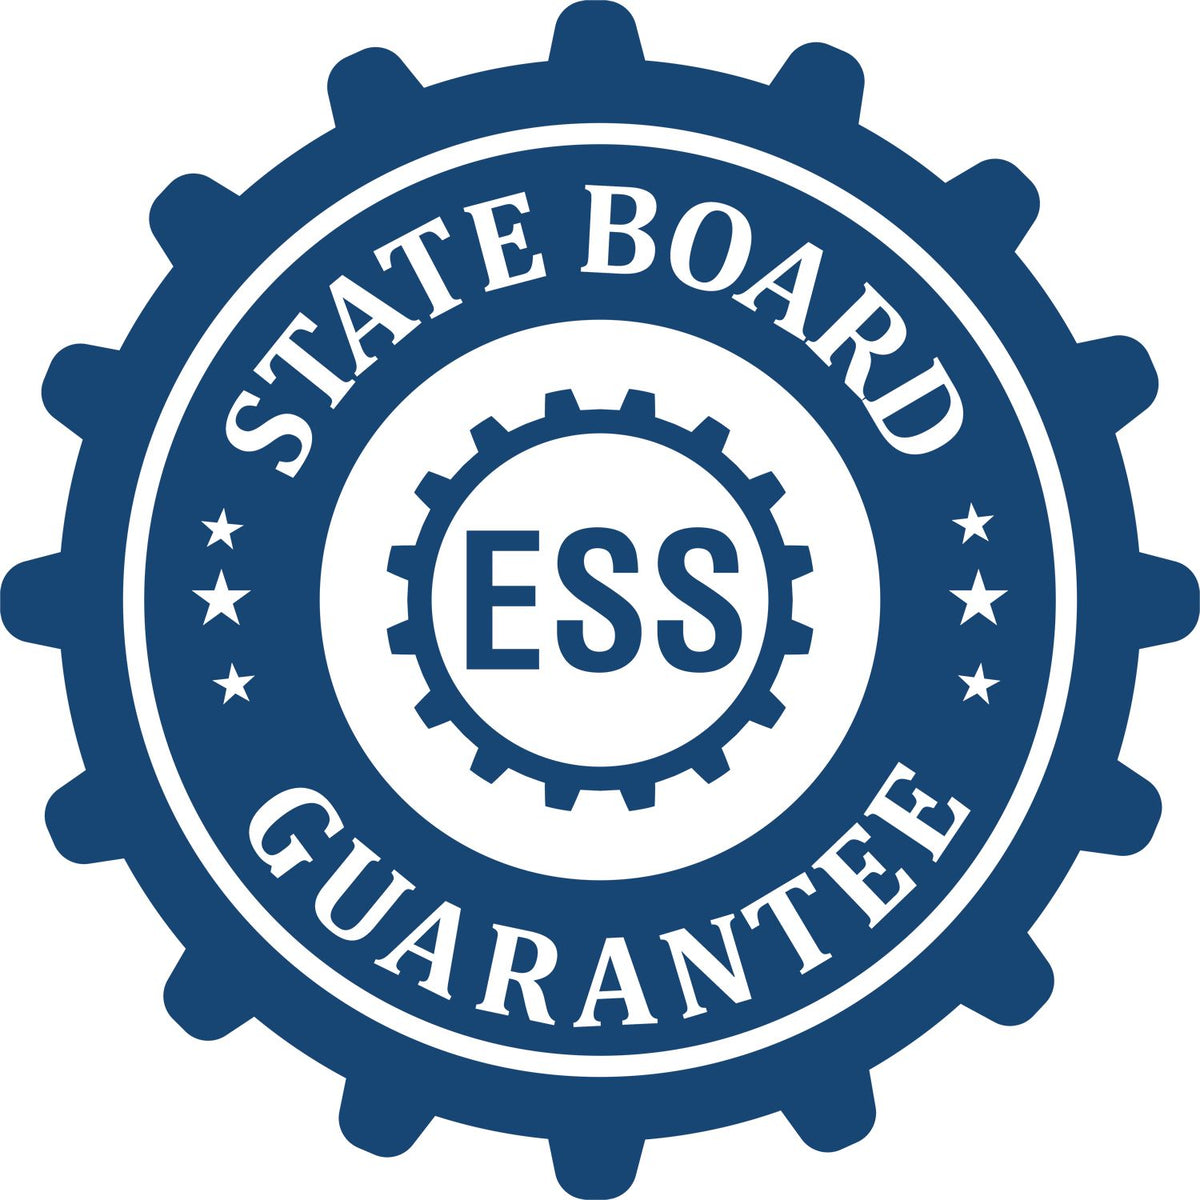 An emblem in a gear shape illustrating a state board guarantee for the Mississippi Engineer Desk Seal product.